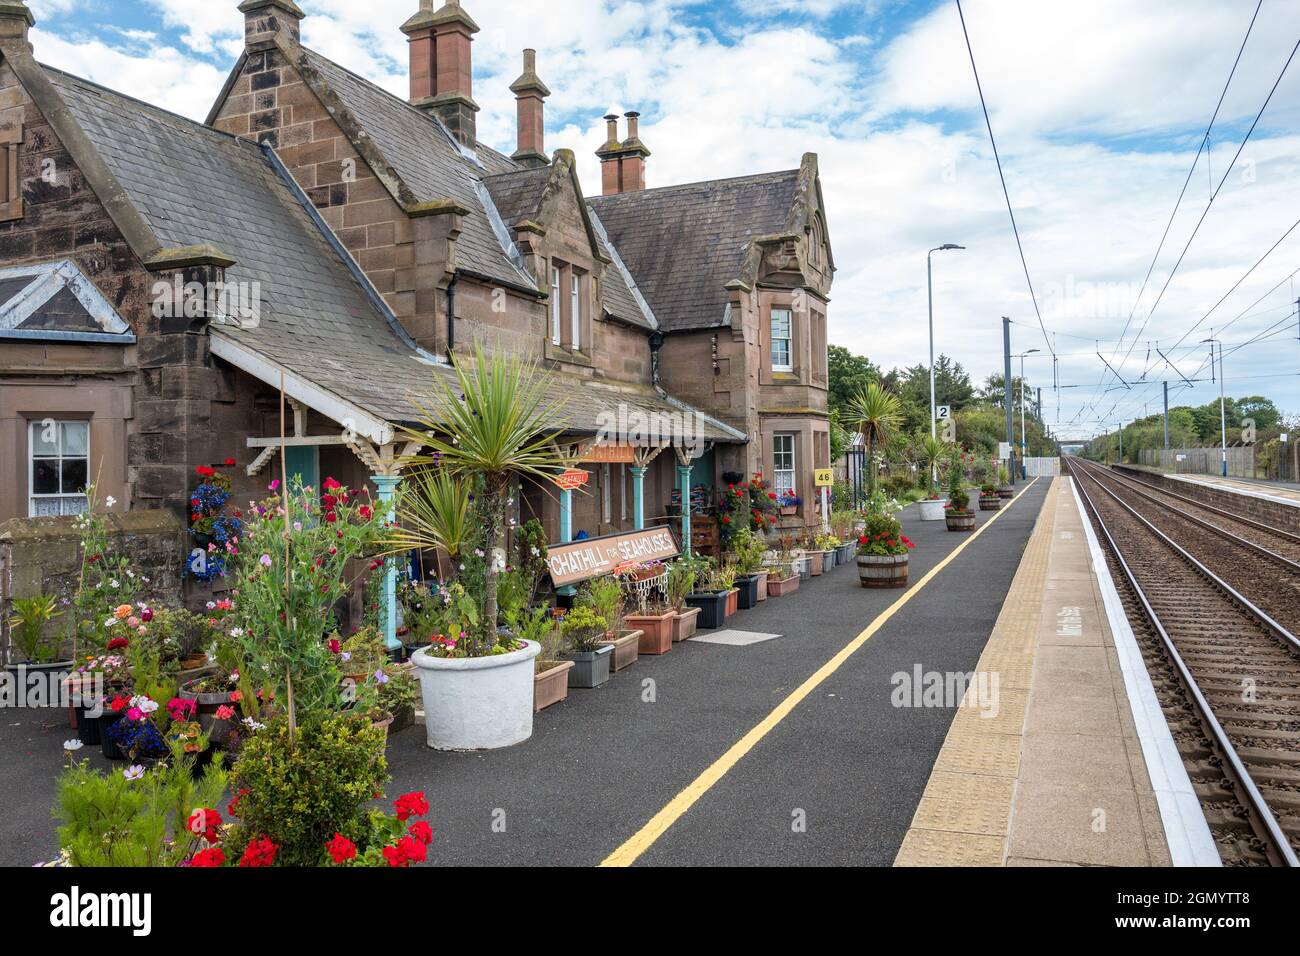 Grade 2 listed Chathill railway station on the east coast mainline. Stock Photo